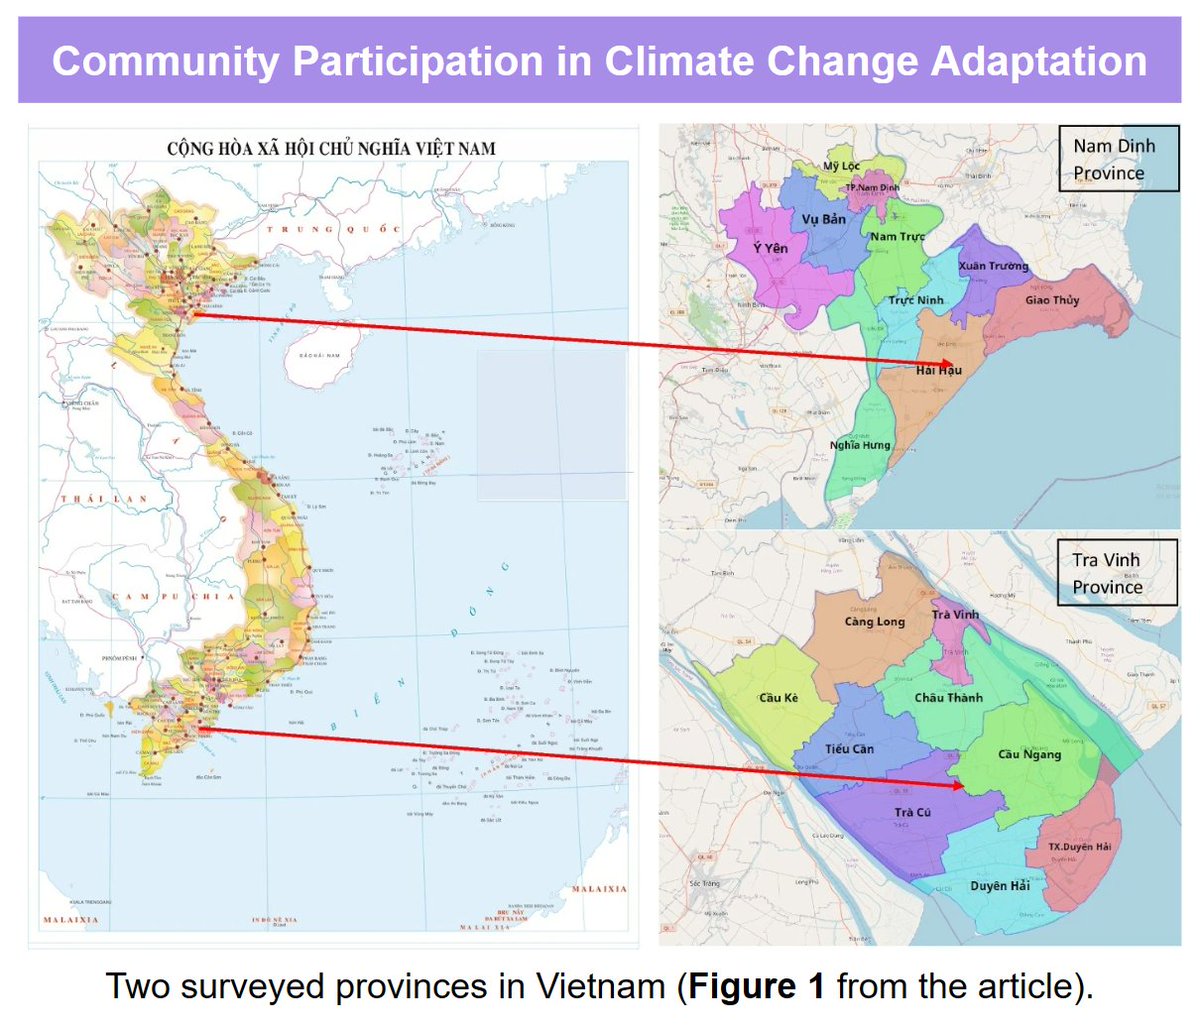 Local capacity to adapt to climate change depends on both government entities and knowledge of local communities. In Vietnam, interviews were conducted in two provinces to understand the role of power imbalance in climate change adaptation. doi.org/10.1007/s10584…